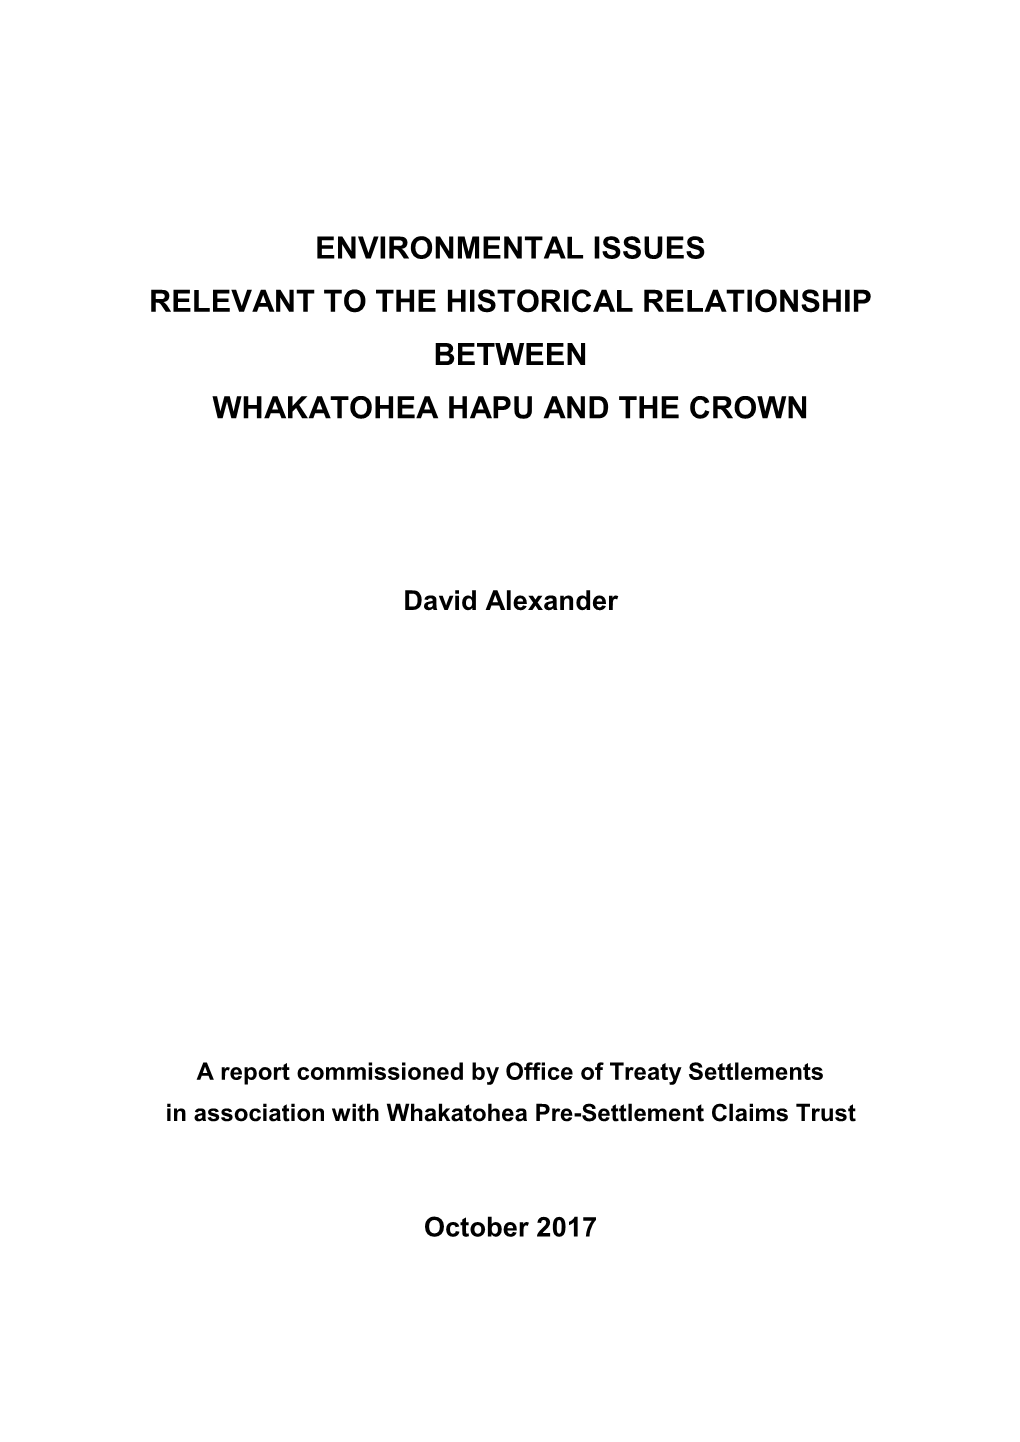 Environmental Issues Relevant to the Historical Relationship Between Whakatohea Hapu and the Crown